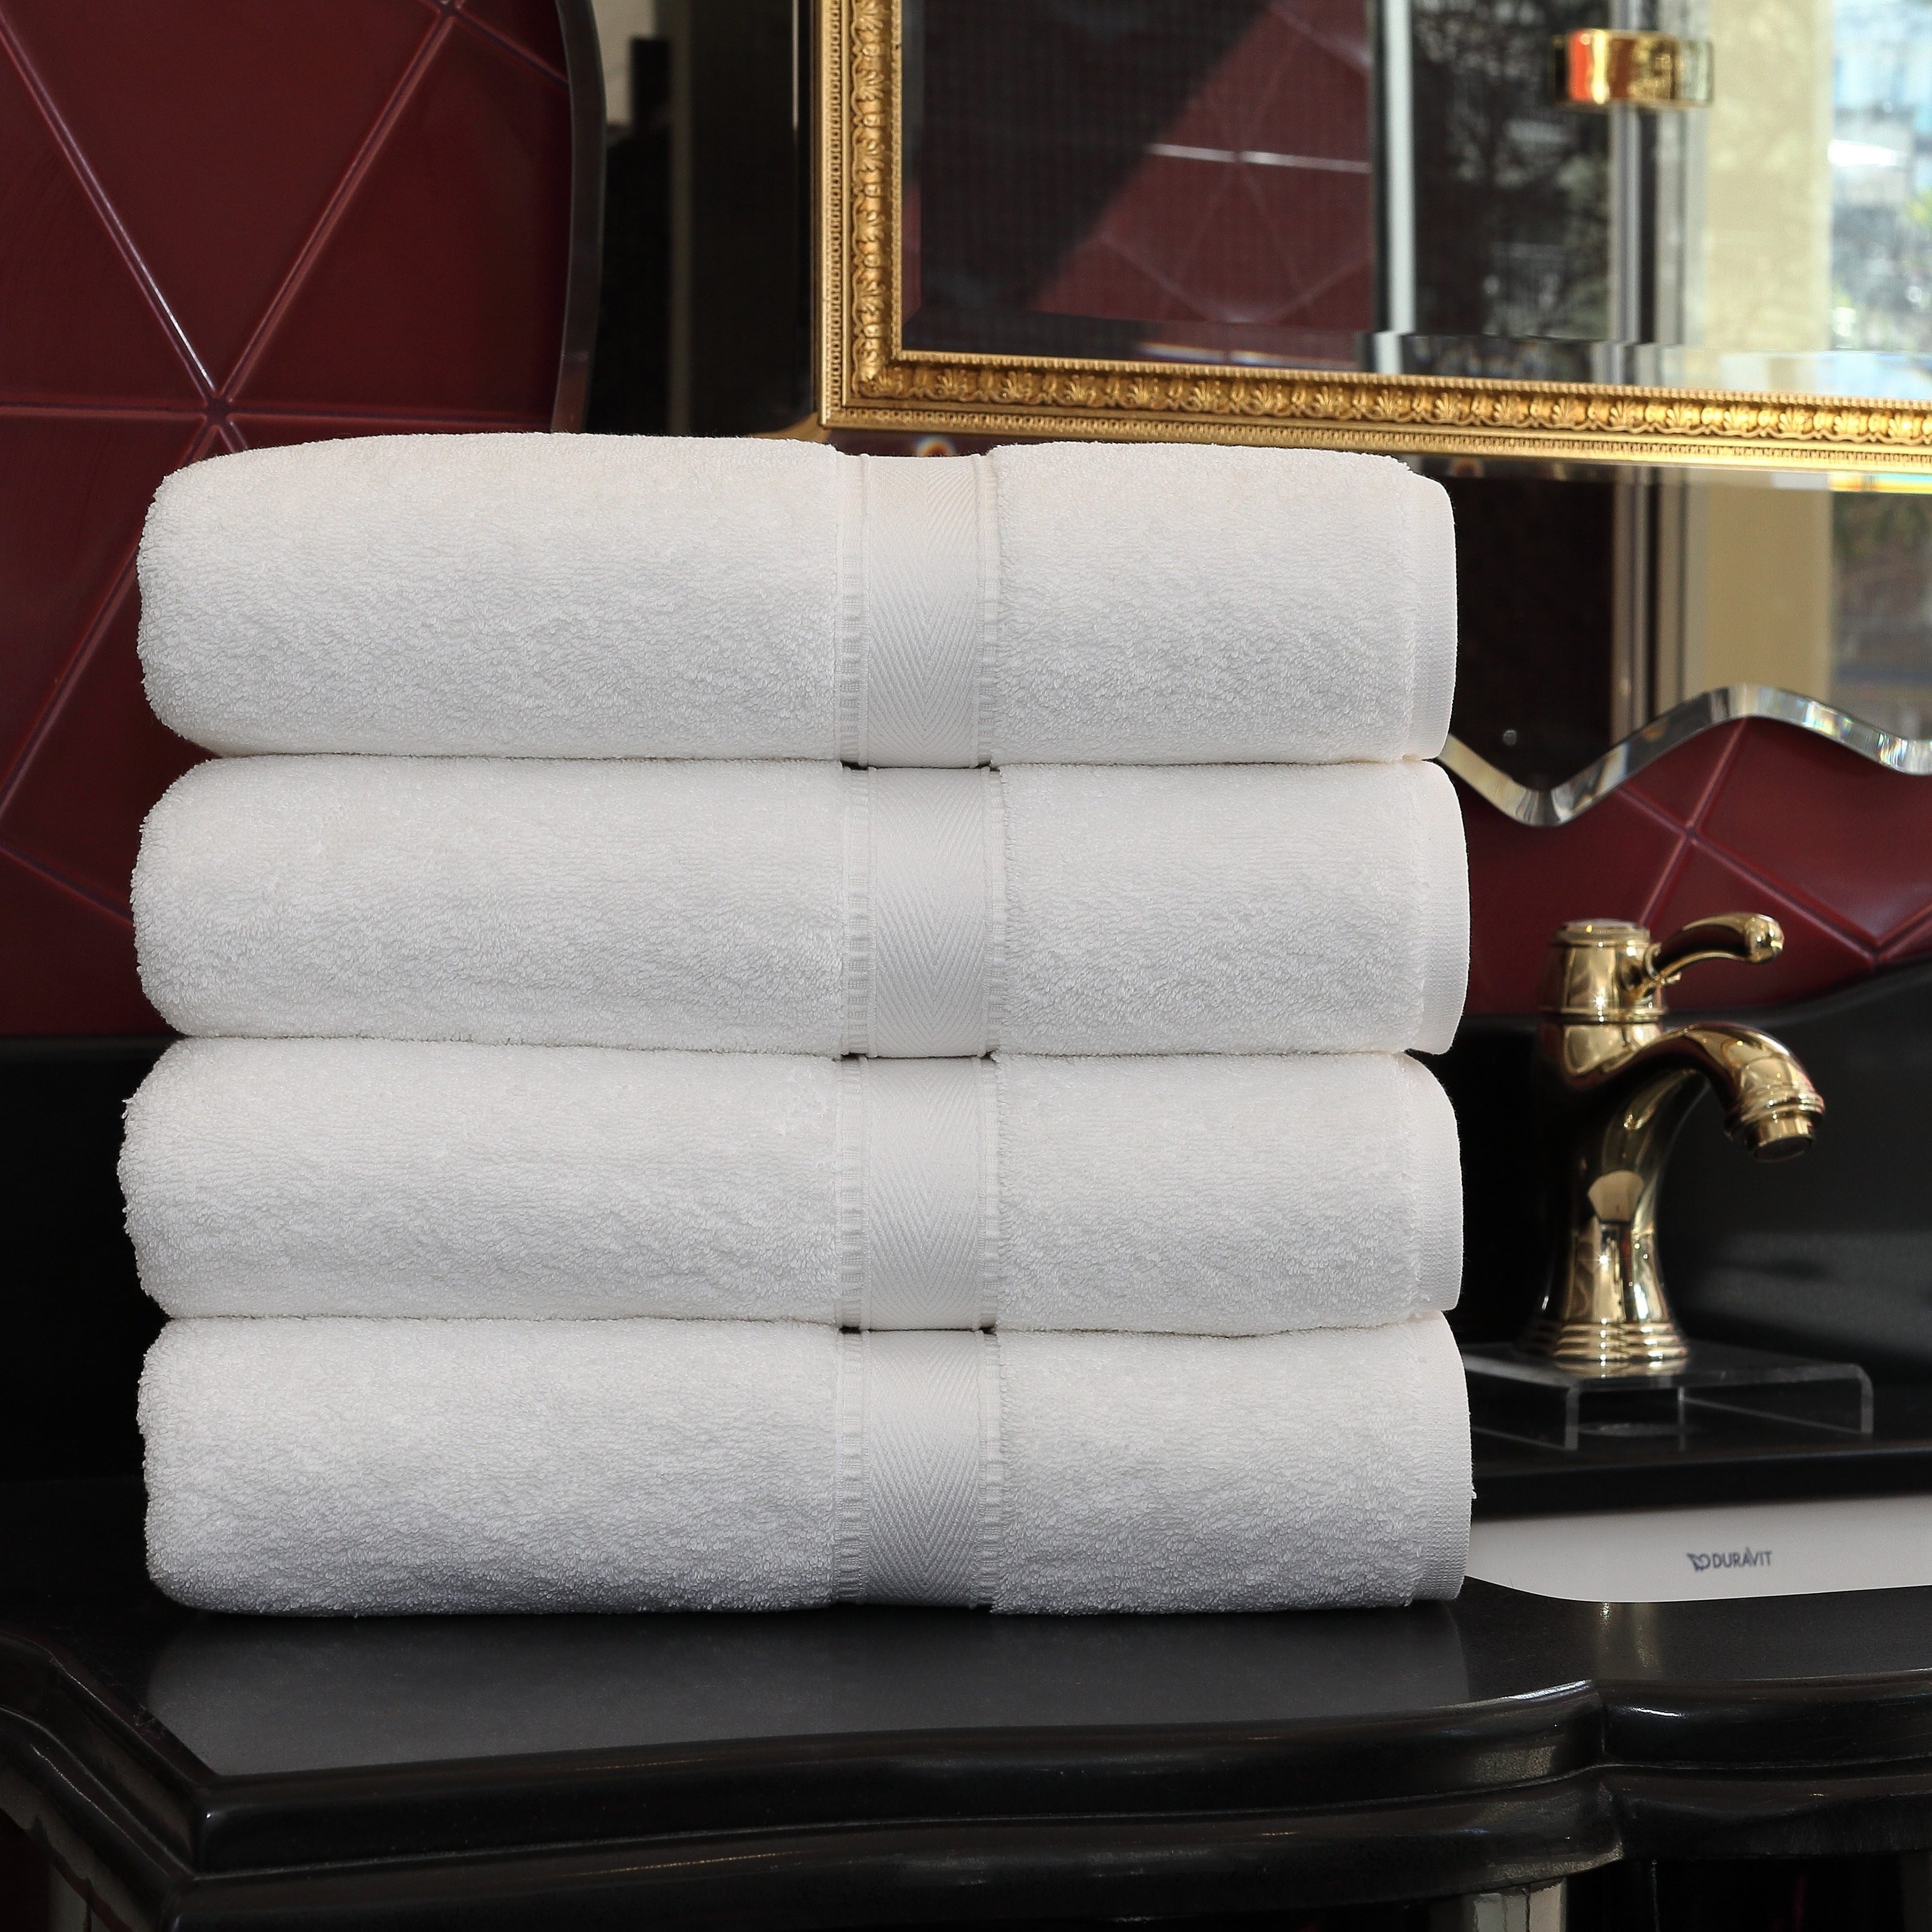 https://ak1.ostkcdn.com/images/products/is/images/direct/8d0f287567ef71beacefaf340fa8f3d4257de38d/Authentic-Hotel-and-Spa-Turkish-Cotton-Bath-Towel-%28Set-of-4%29.jpg